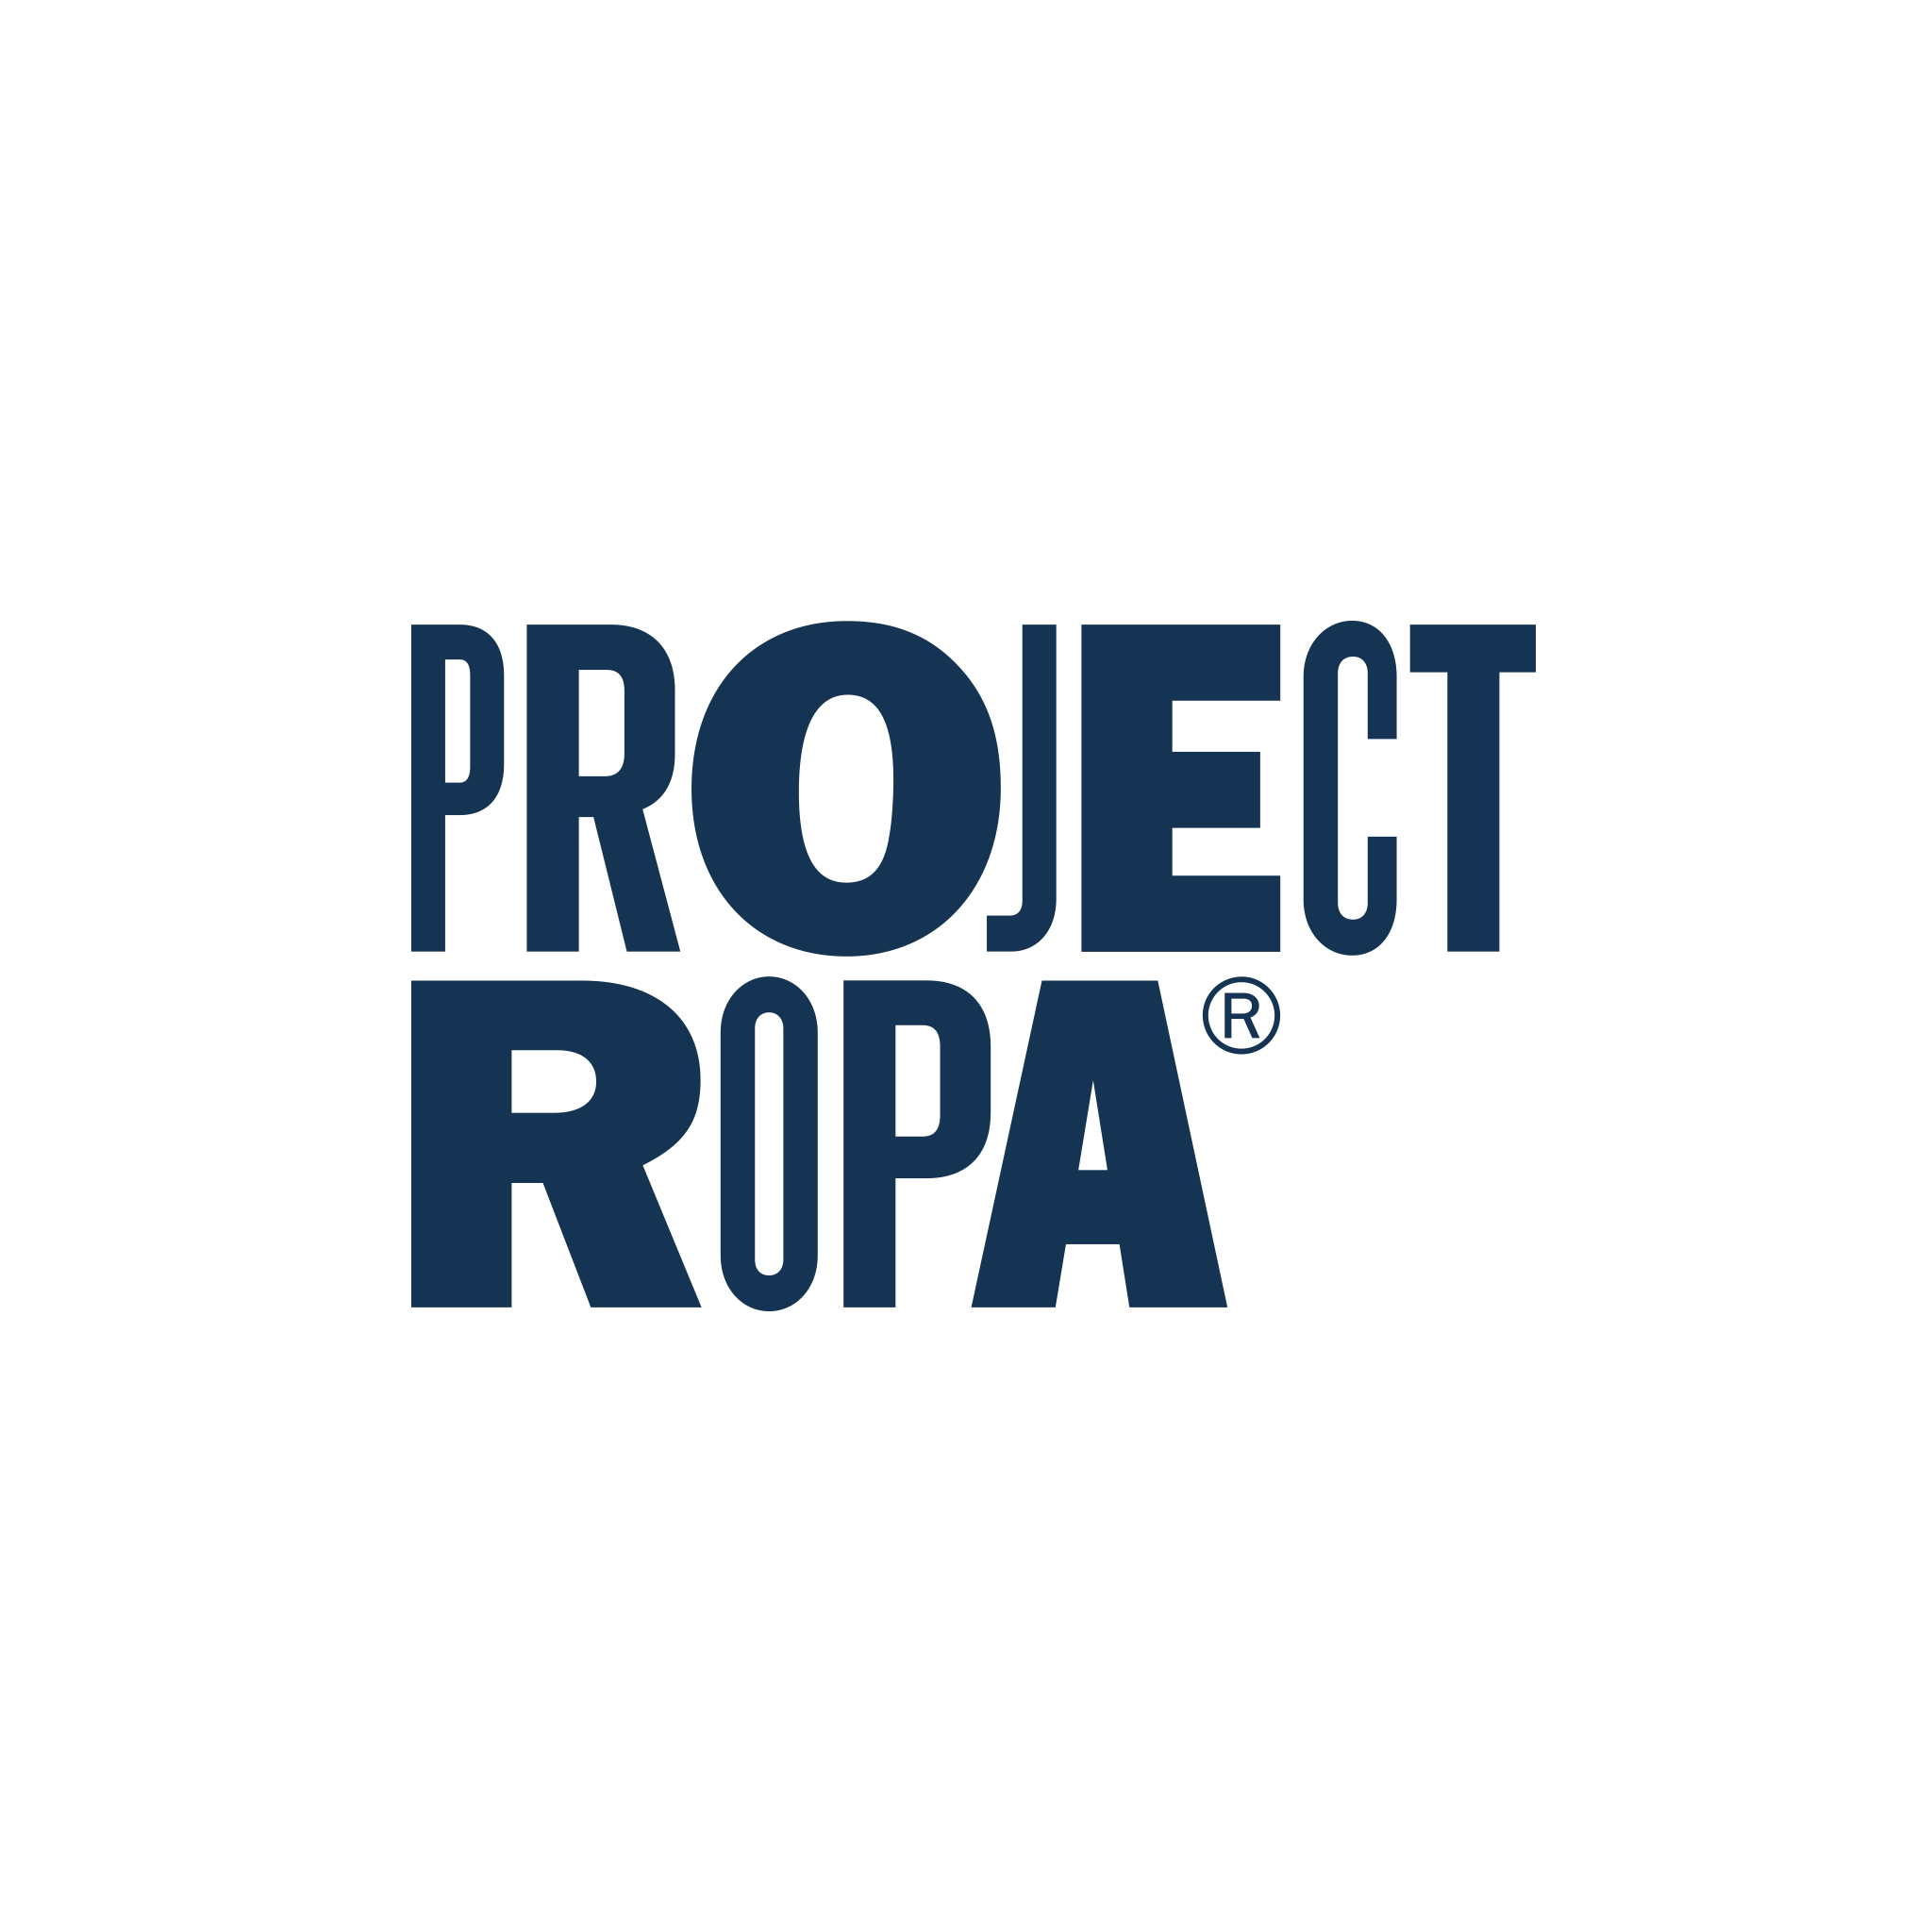 Project Ropa logo